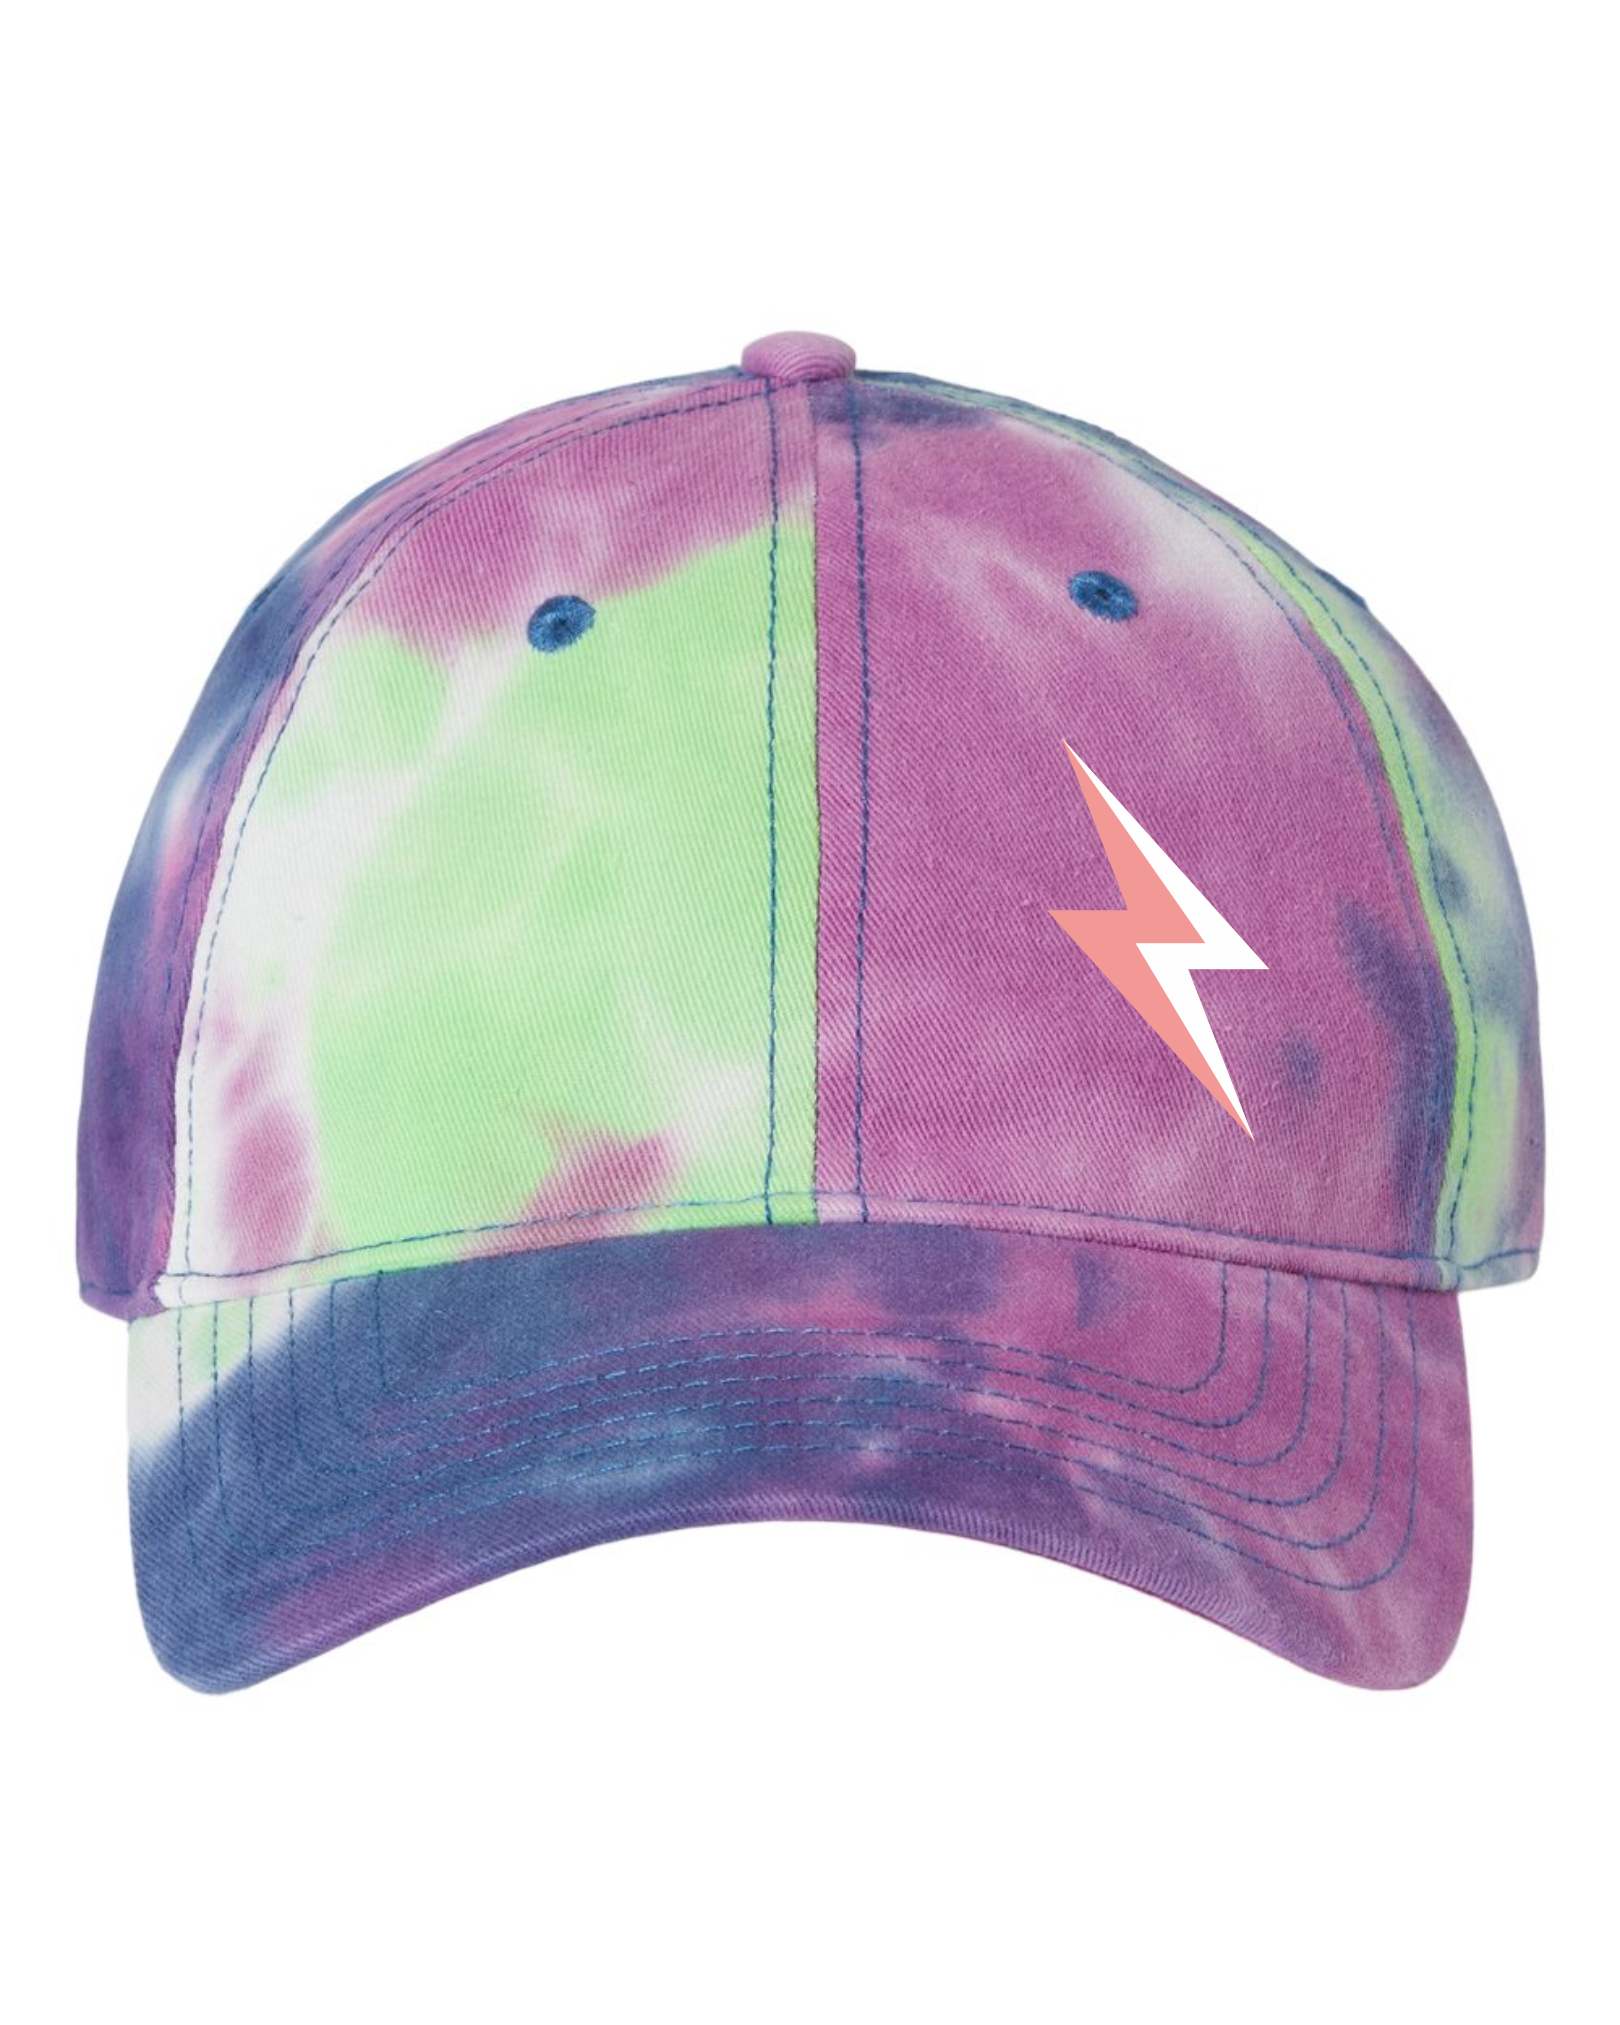 Rock Your Body - Sportsman Tie Dyed Hats